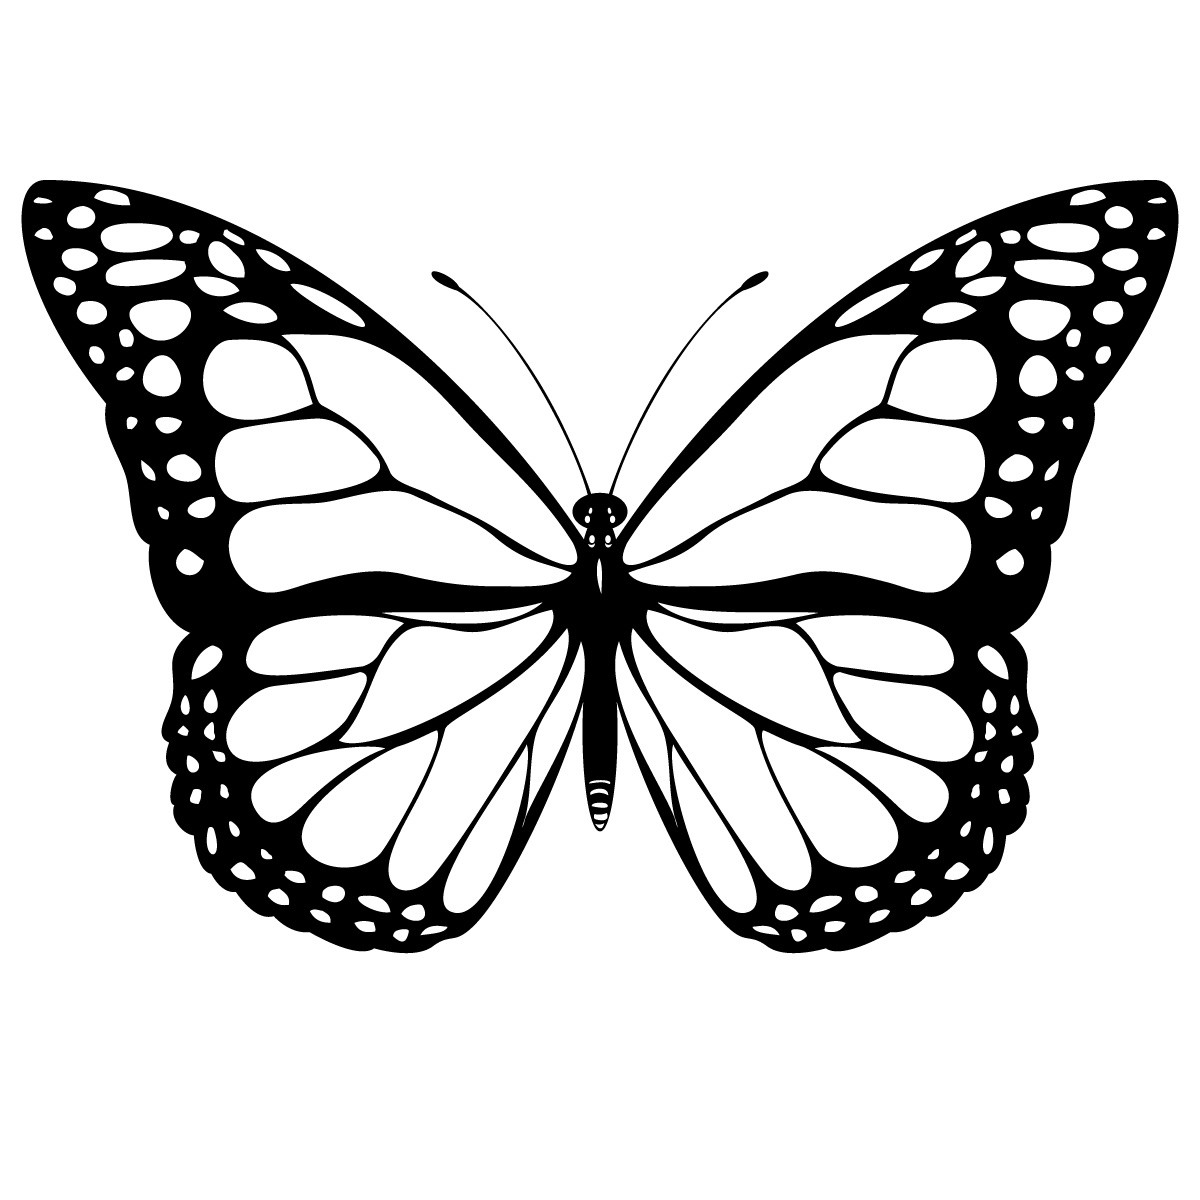 colors of n<strong>a</strong>ture 21 butterfly coloring pages and